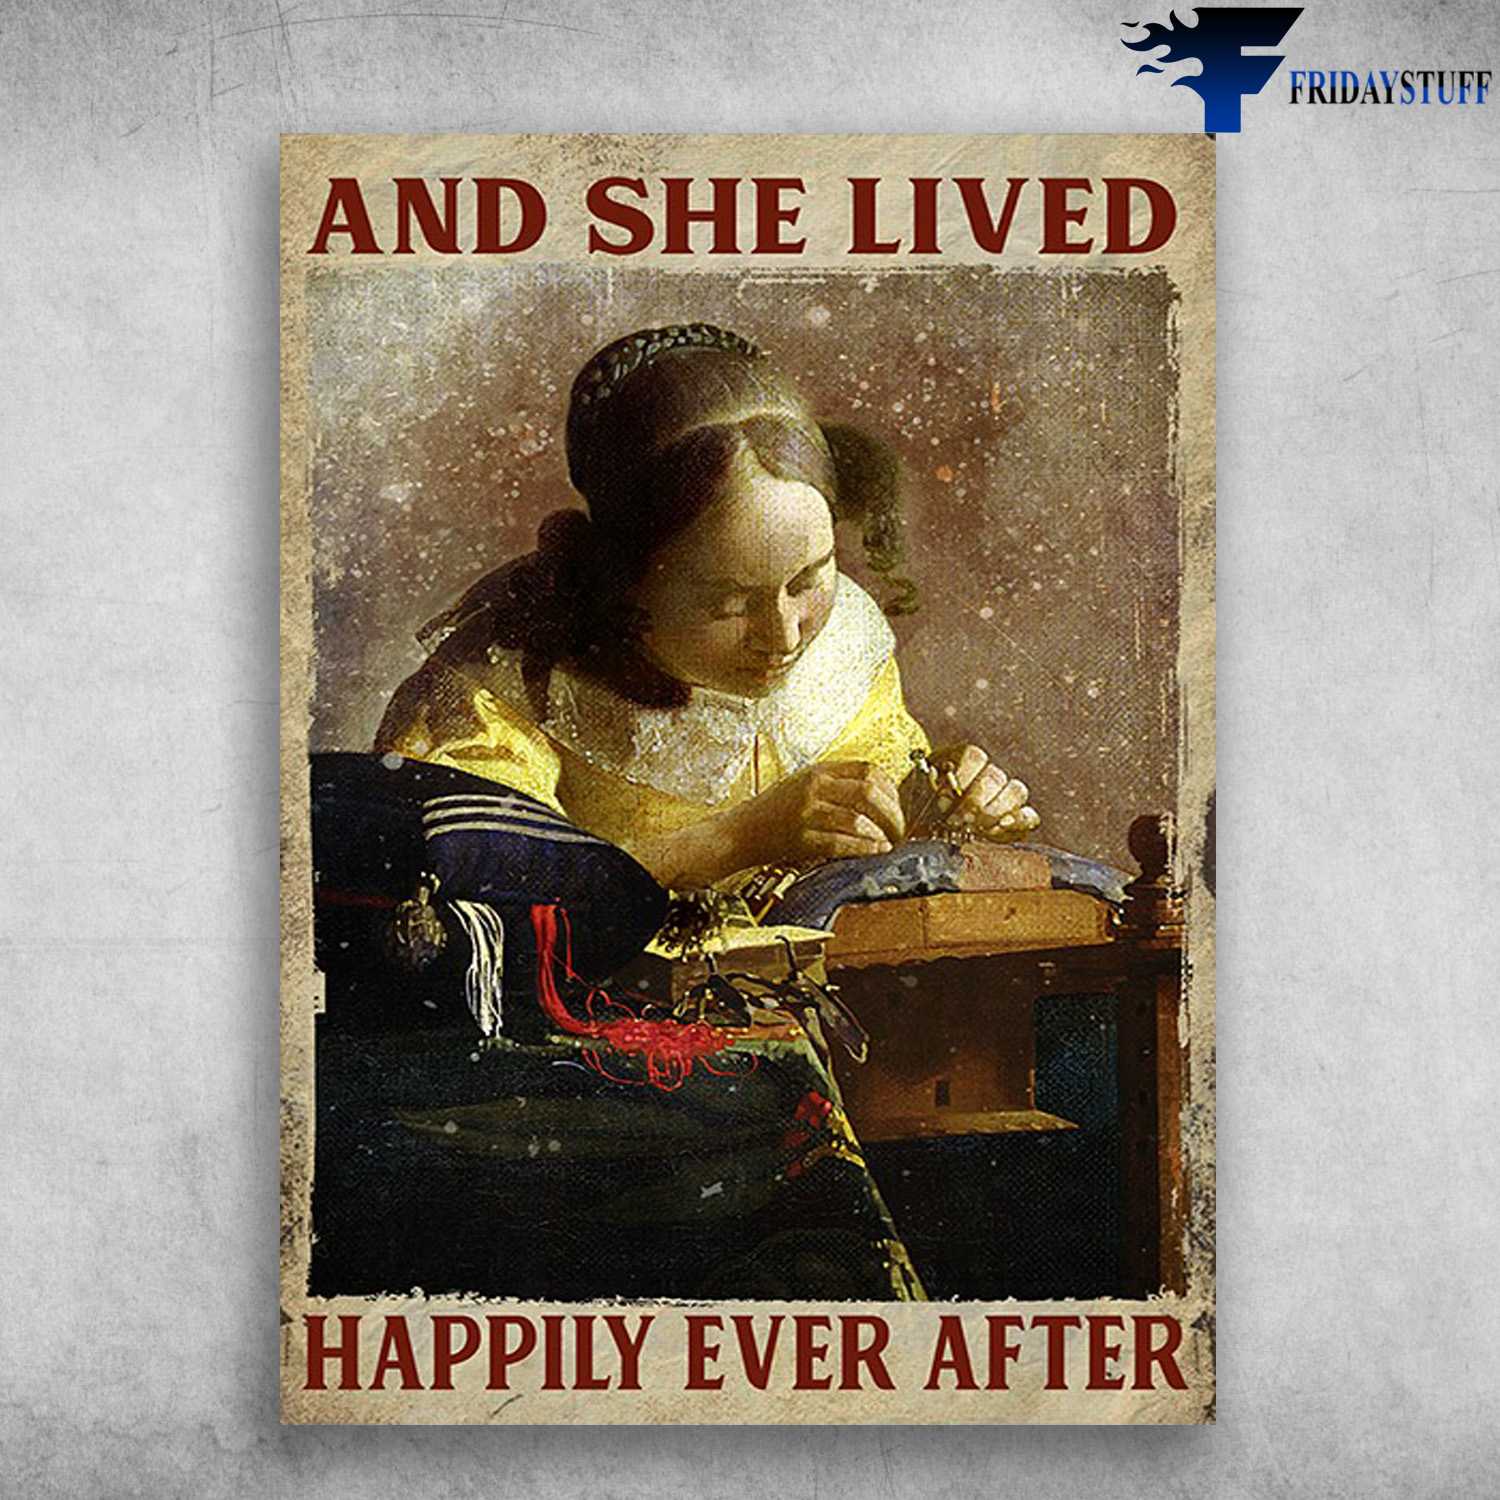 Knitting Girl - And She Lived, Happily Ever After